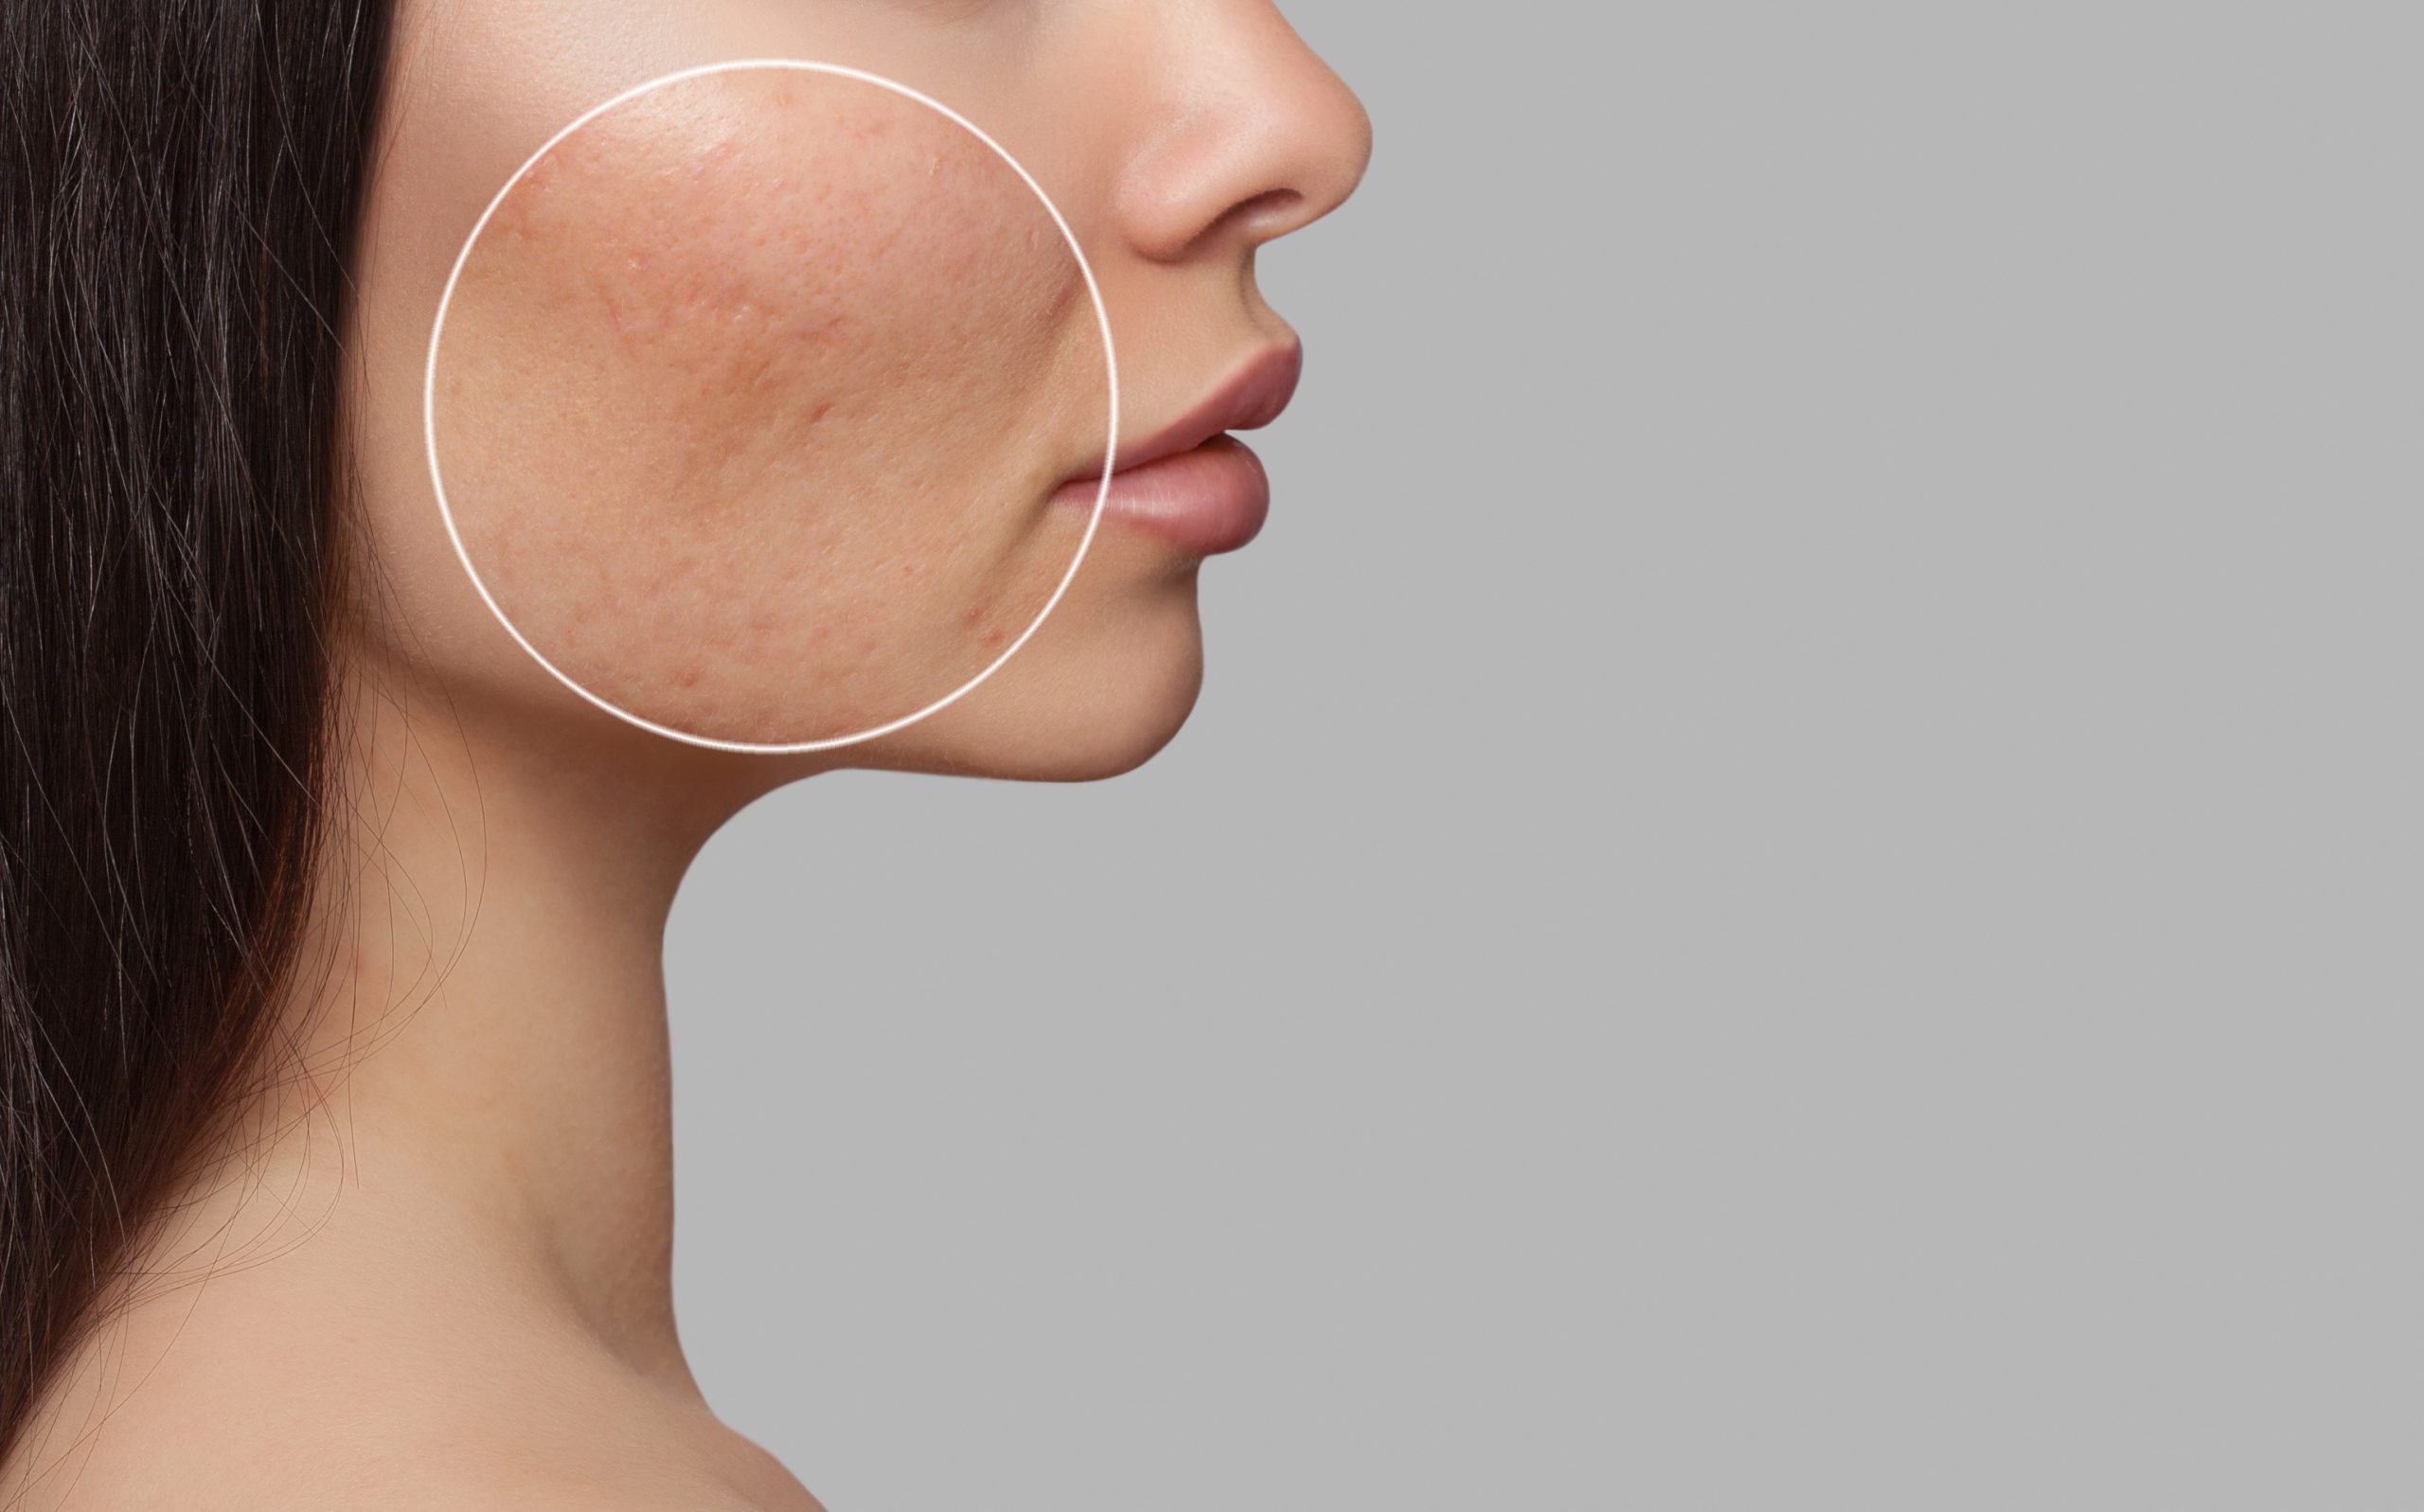 The Truth About What Works for Acne Scars